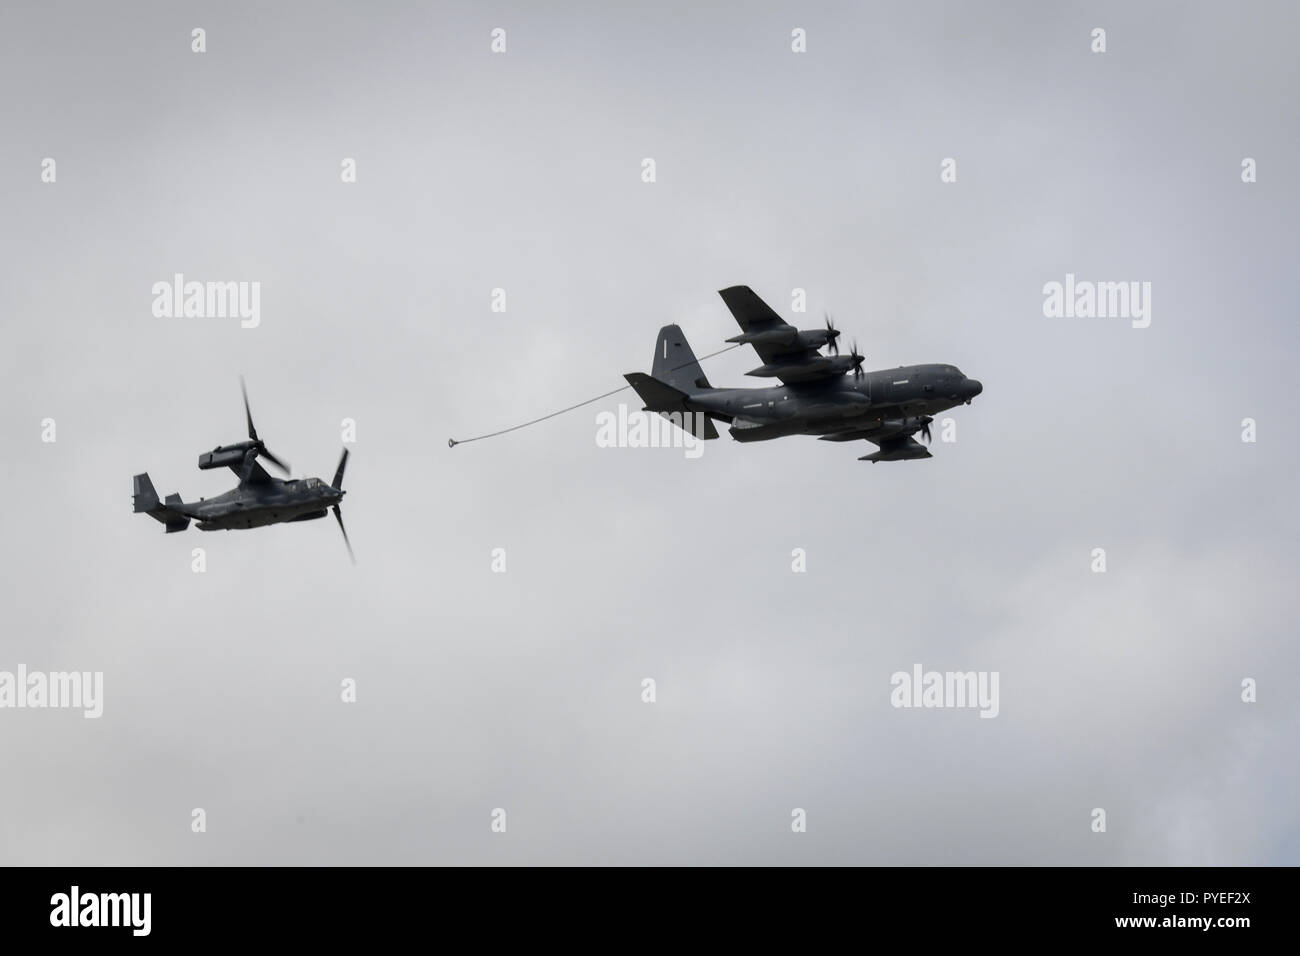 An MC-130J Commando II, assigned to the 15th Special Operations Squadron, and a CV-22 tiltrotor aircraft, assigned to the 8th Special Operations Squadron, demonstrate mid-flight refueling during an aerial demonstration at the U.S. Air Force Master Sgt. John A. Chapman Medal of Honor celebration at Hurlburt Field, Florida, Oct. 26, 2018. Hurlburt Field hosted several festivities such as an aerial demonstration, a building renaming and a live concert in memory of Chapman, a combat controller who made the ultimate sacrifice during an intense battle in the mountains of Afghanistan. Chapman was pos Stock Photo